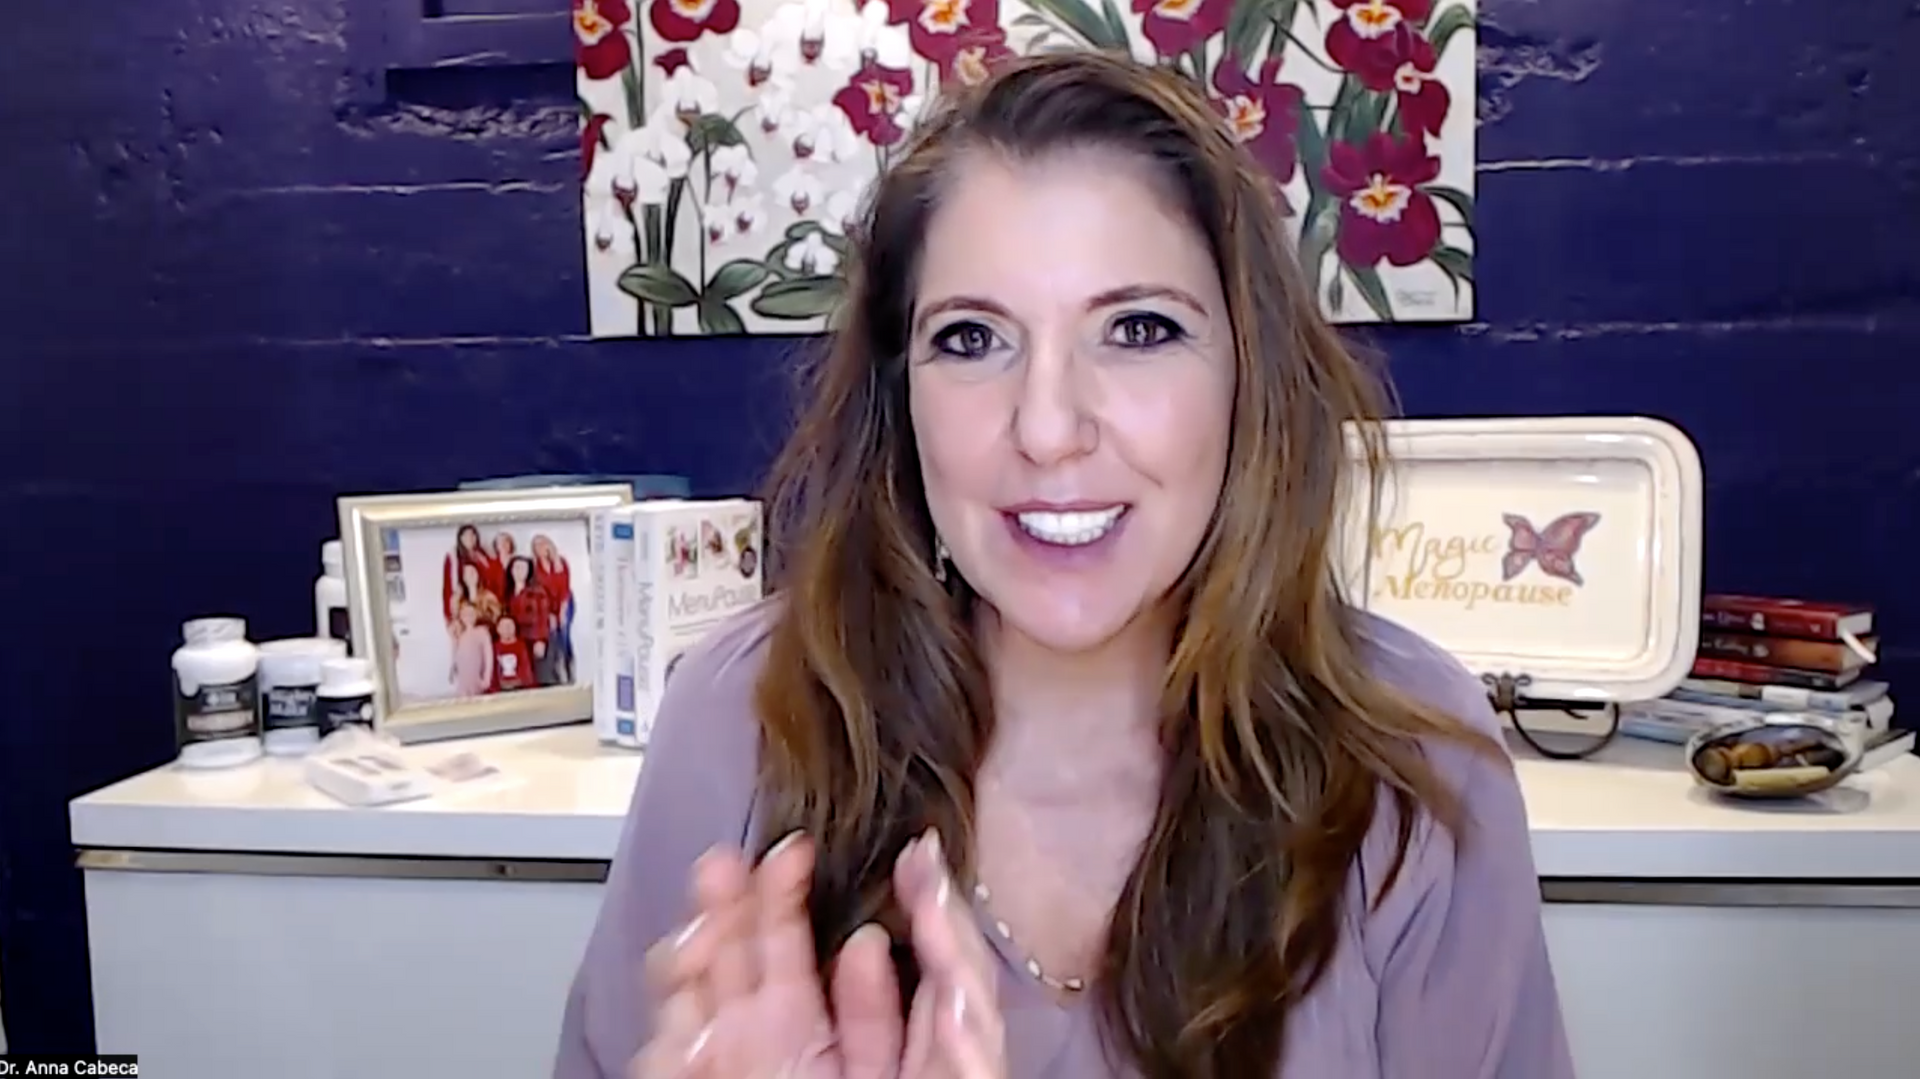 Load video: Finally, it’s here. Dr. Anna’s Menopause Kit.